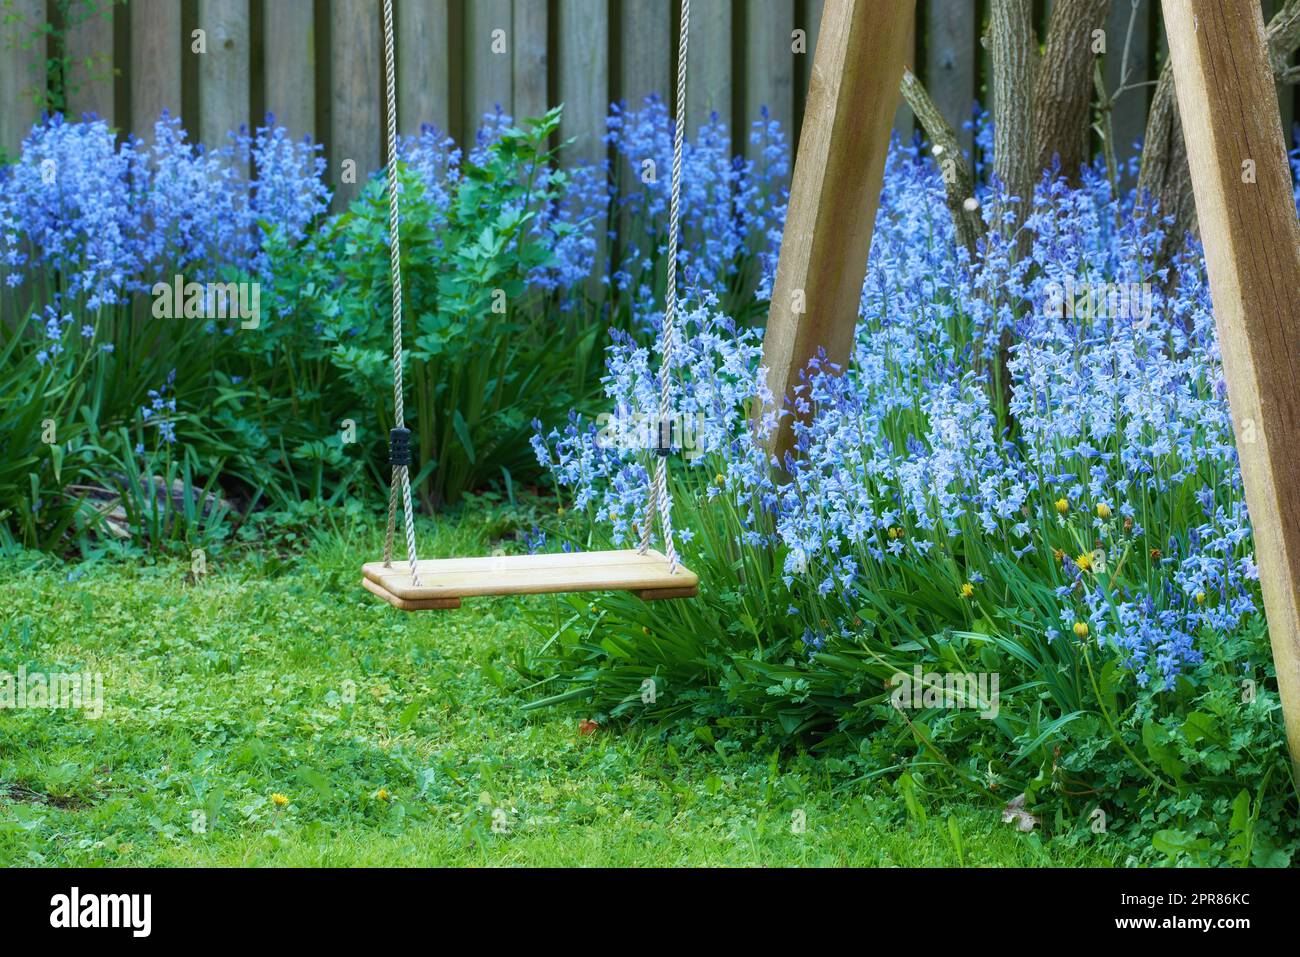 Fun garden swing with common bluebell flowers growing and flowering on green stems in private, secluded home backyard. Textured detail view of blooming blue kent bells or campanula plants blossoming Stock Photo